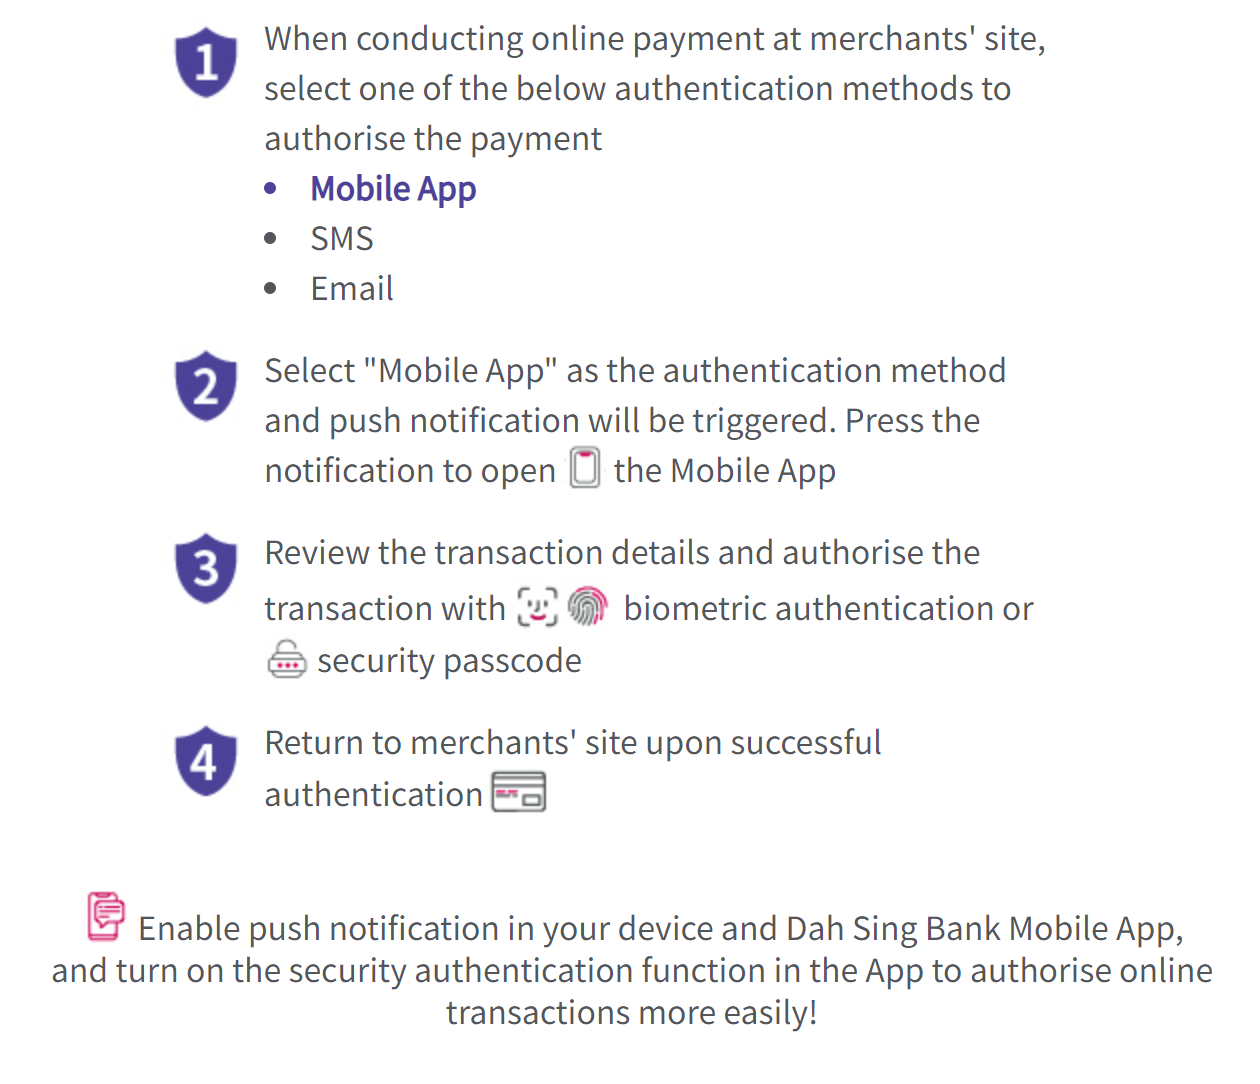 New authentication functions on Dah Sing Bank Mobile App